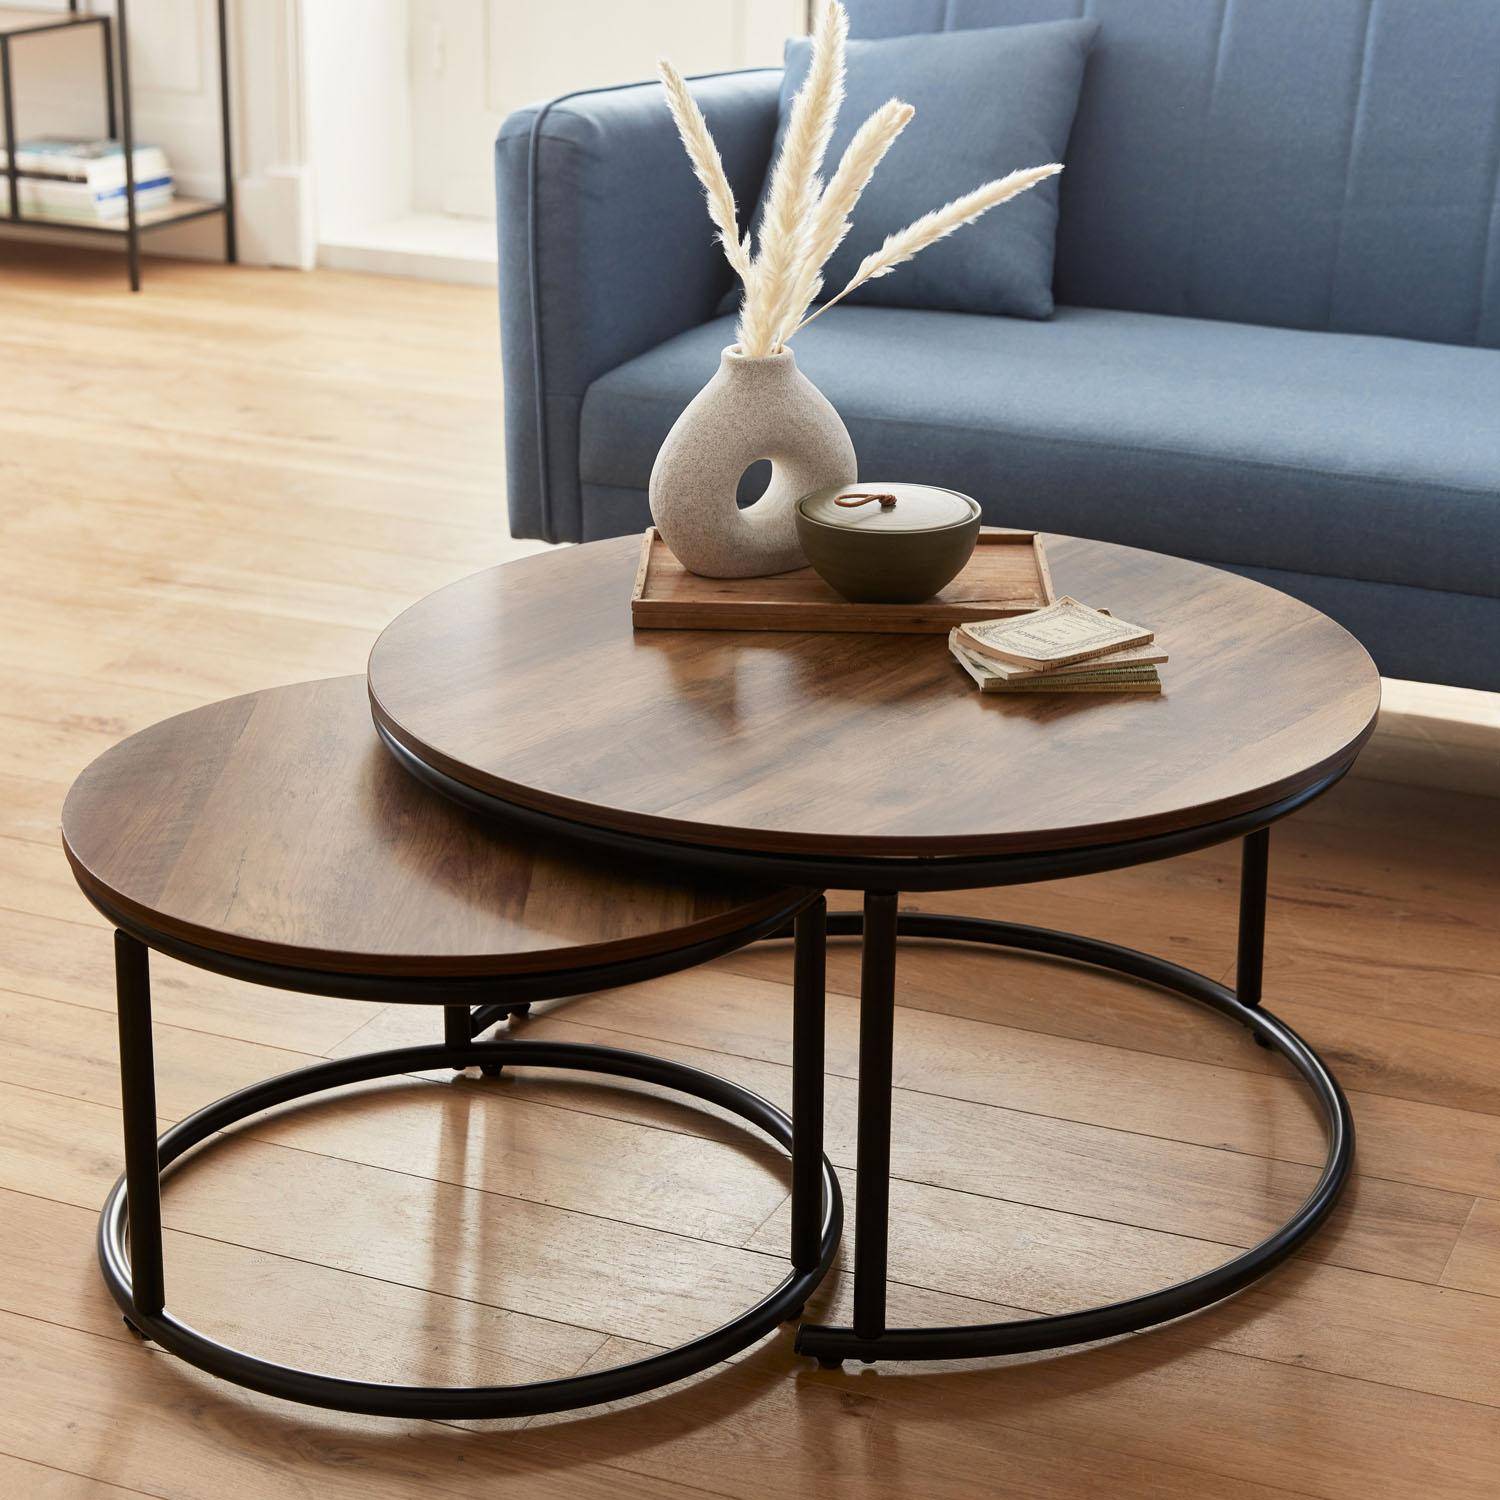 Pair of round, metal and wood-effect nesting coffee tables, 77x40x57cm - Loft,sweeek,Photo2